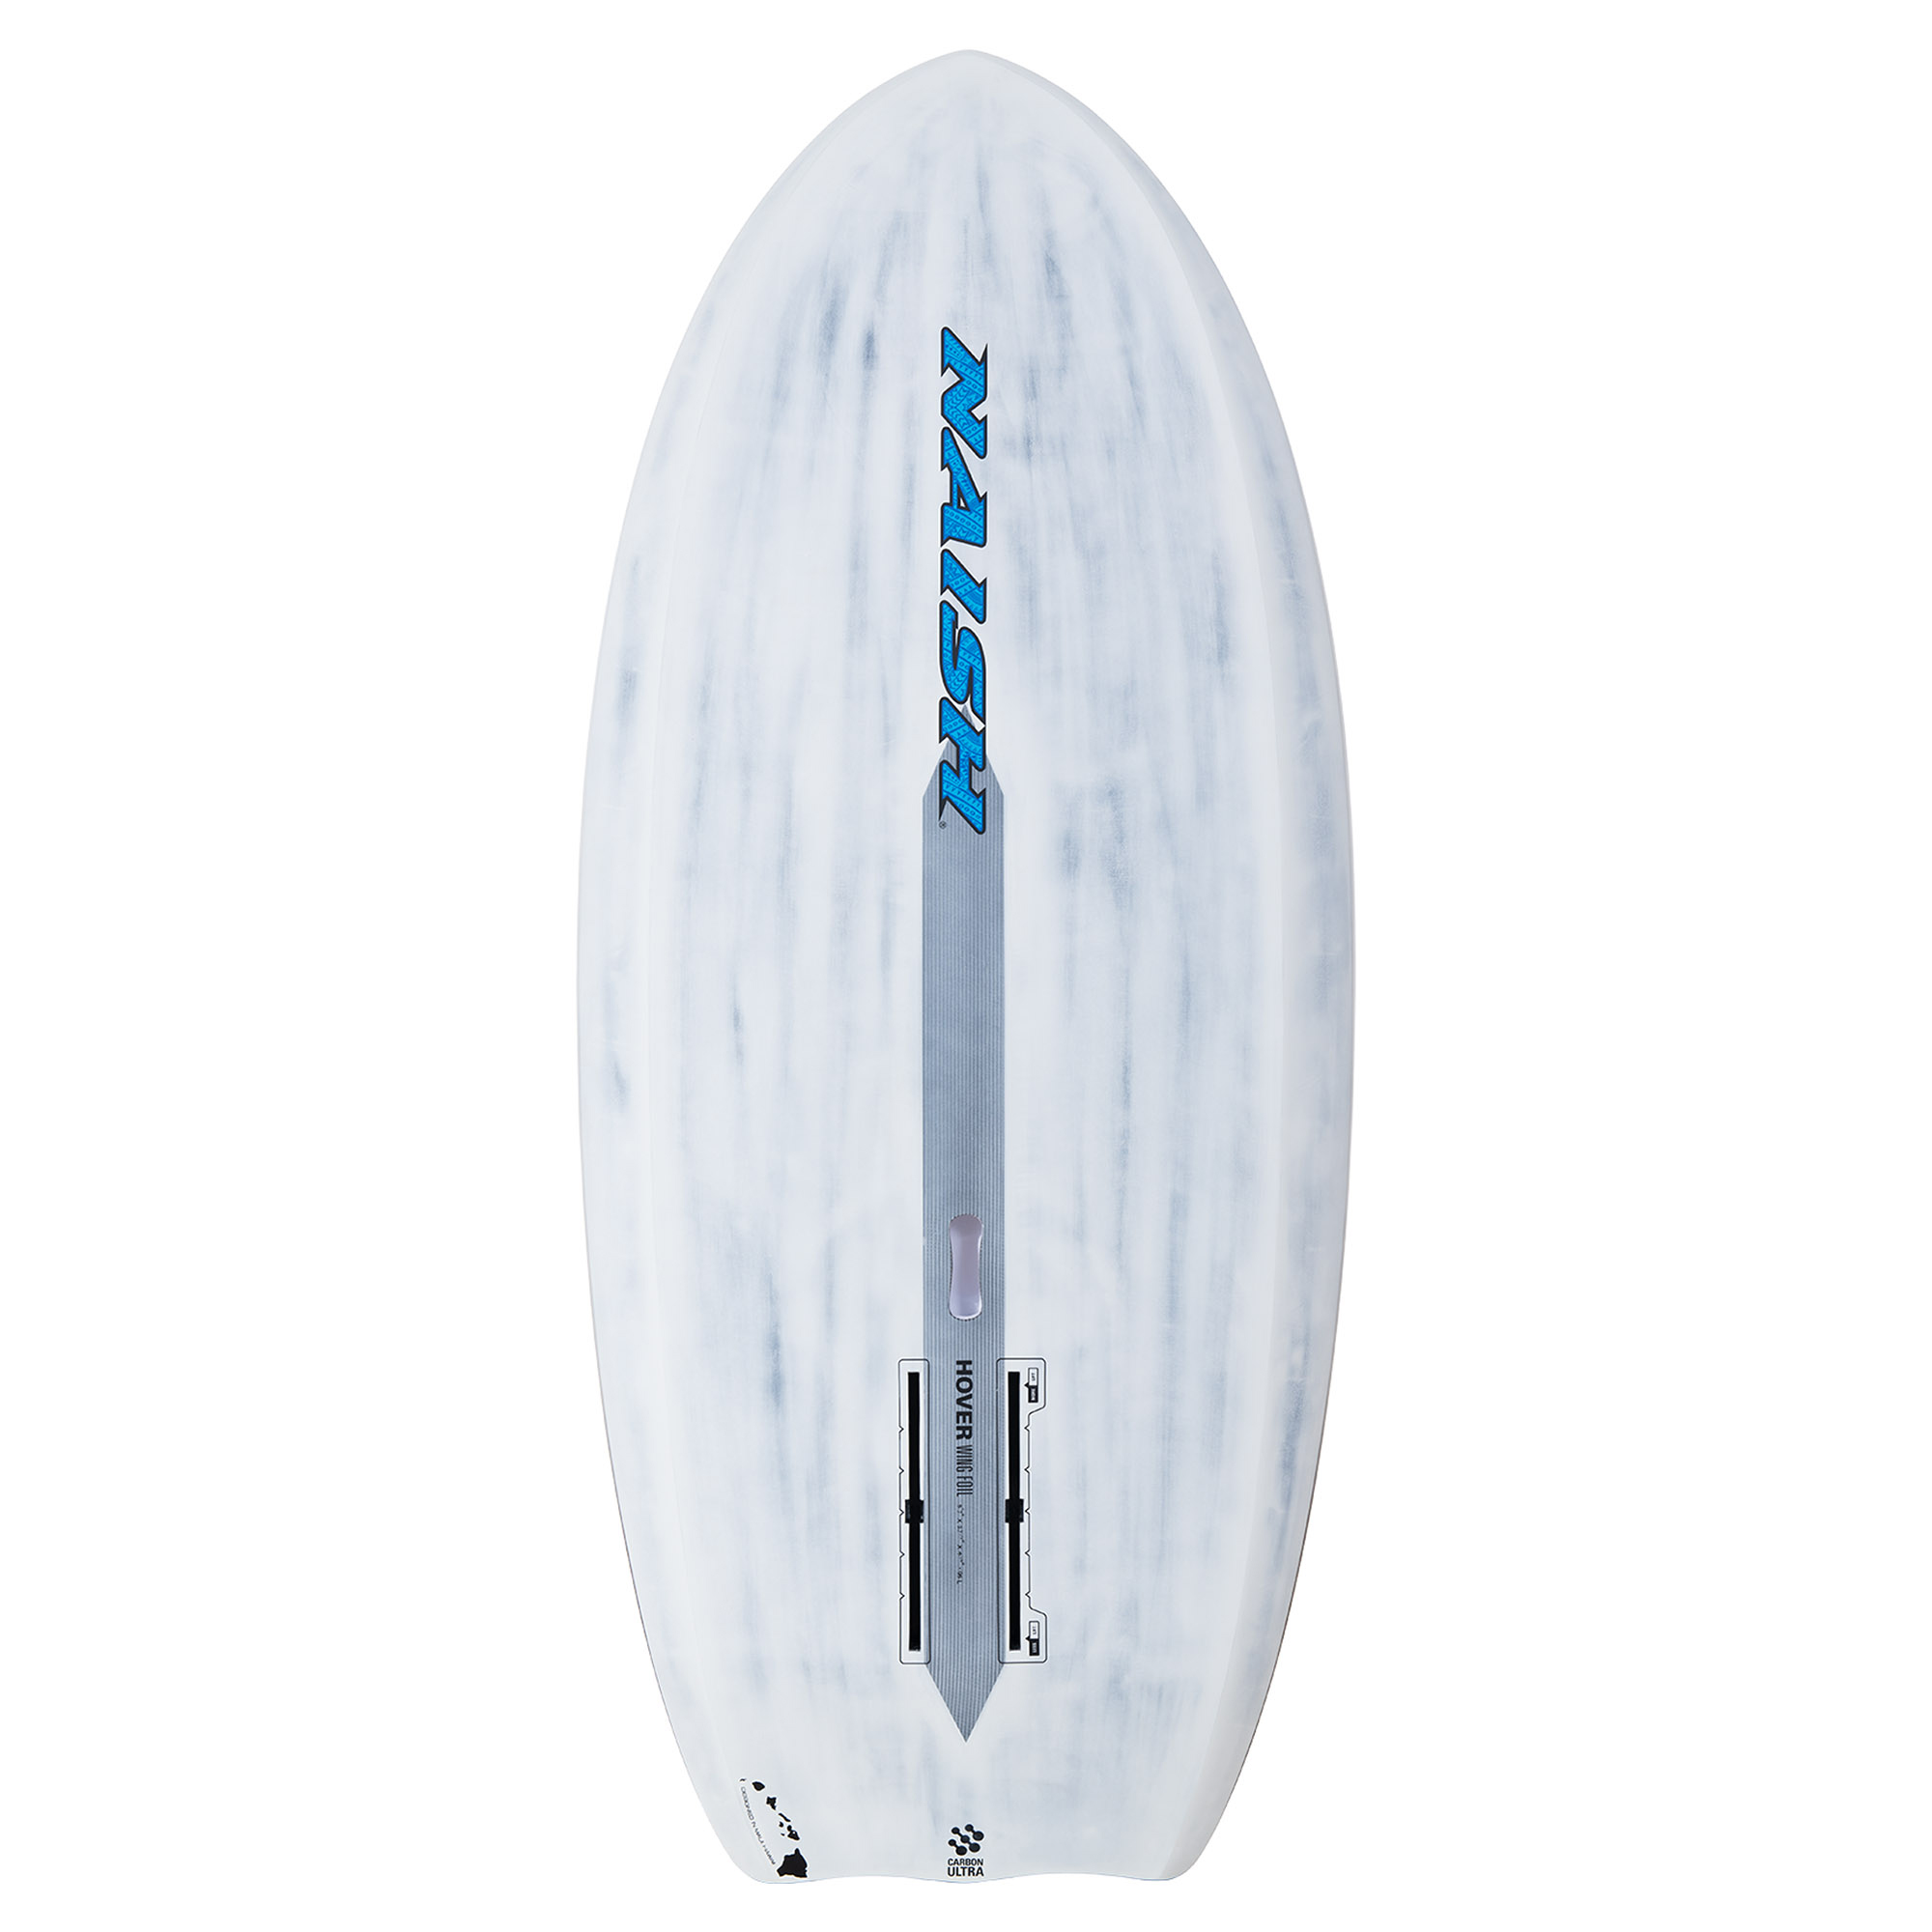 0690245_naish-s26-hover-wing-foil-carbon-ultra-75-bb-75